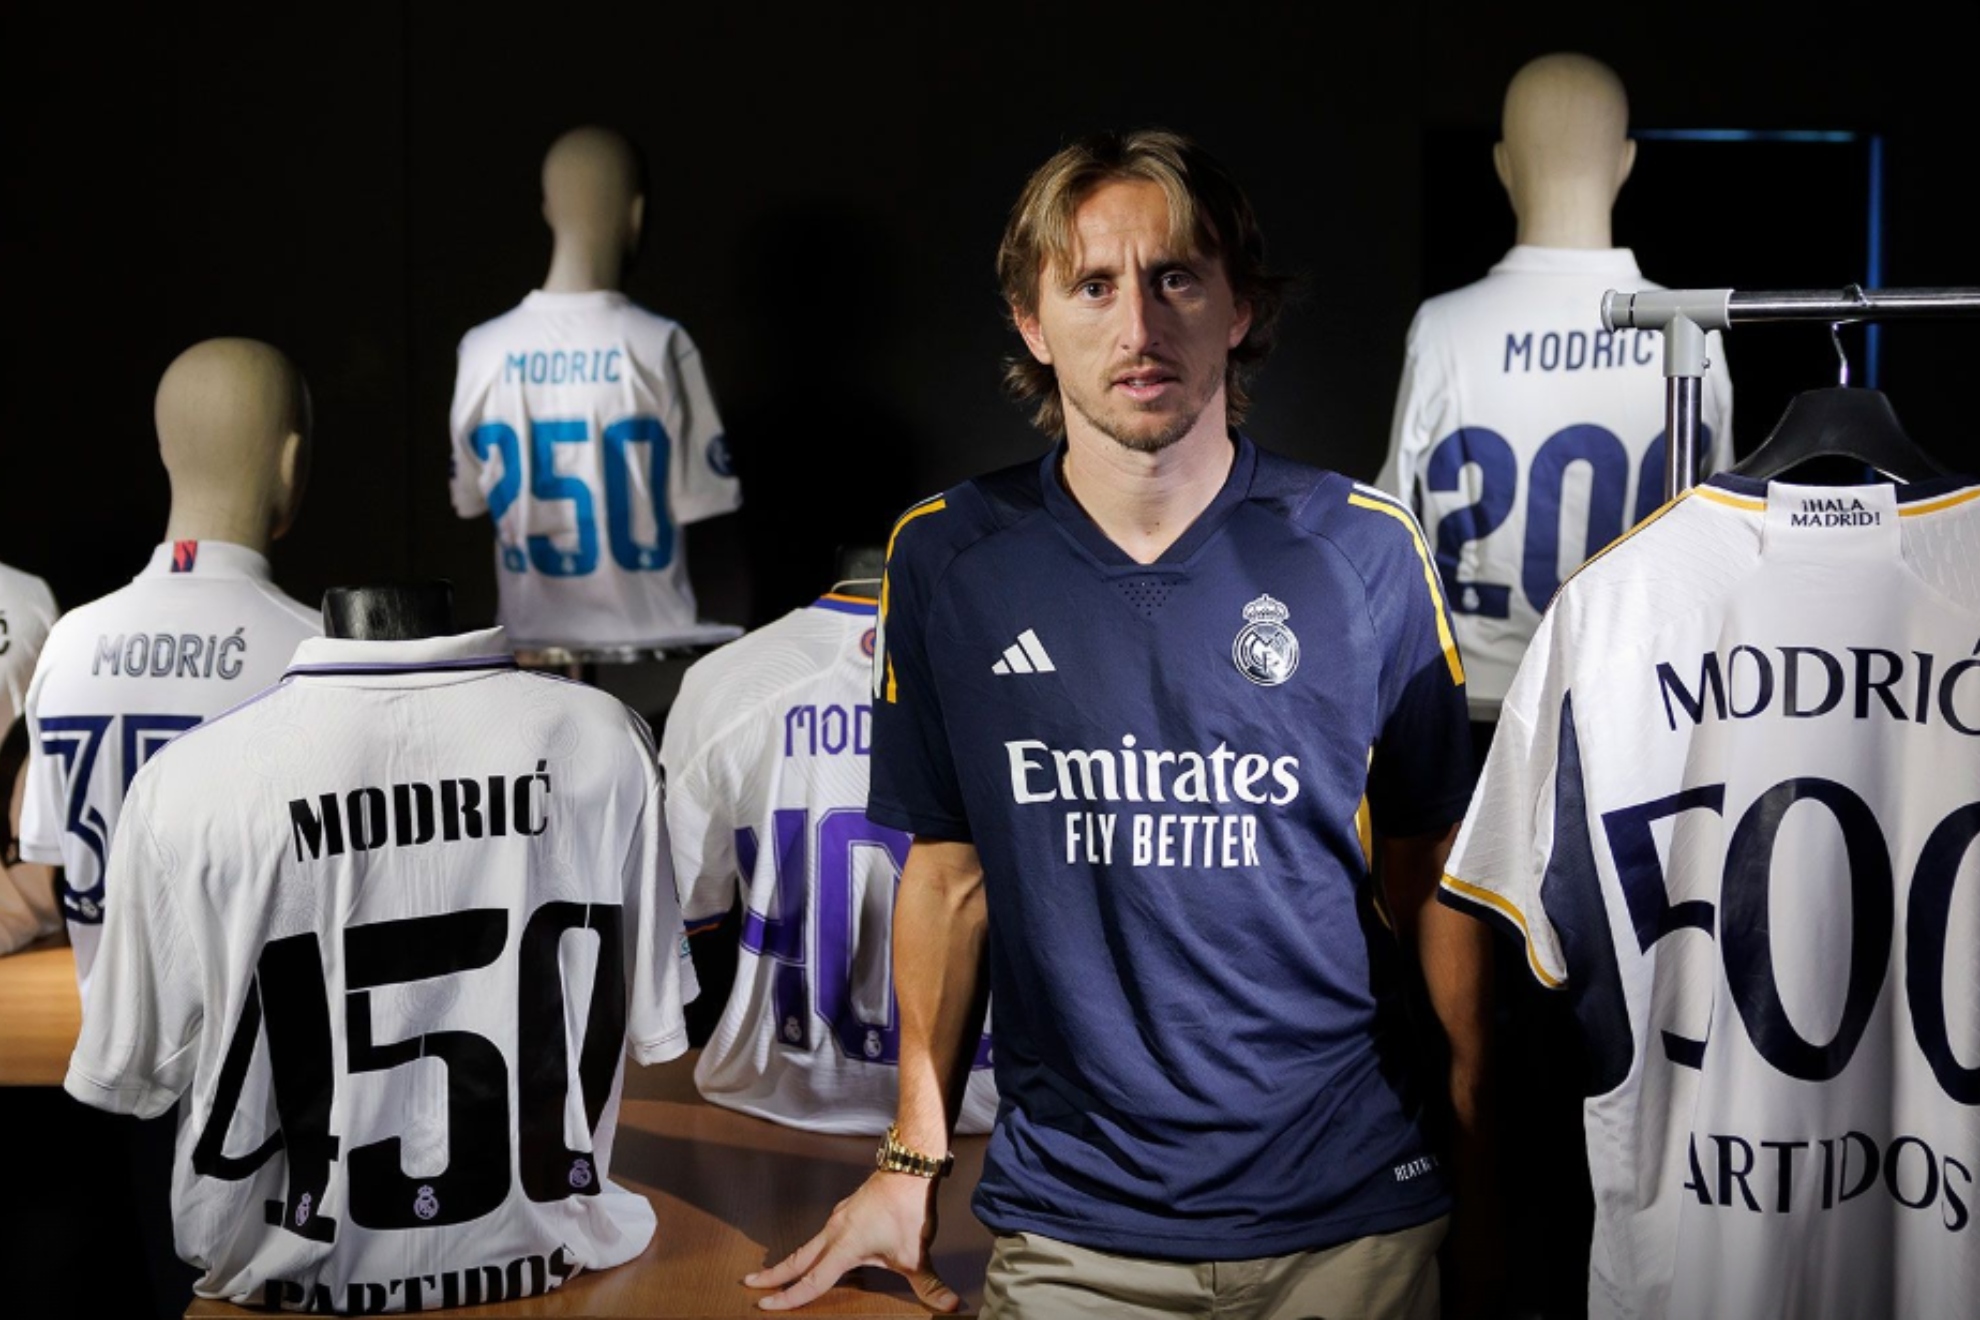 Modric, surrounded by the commemorative shirts of the matches played with Real Madrid